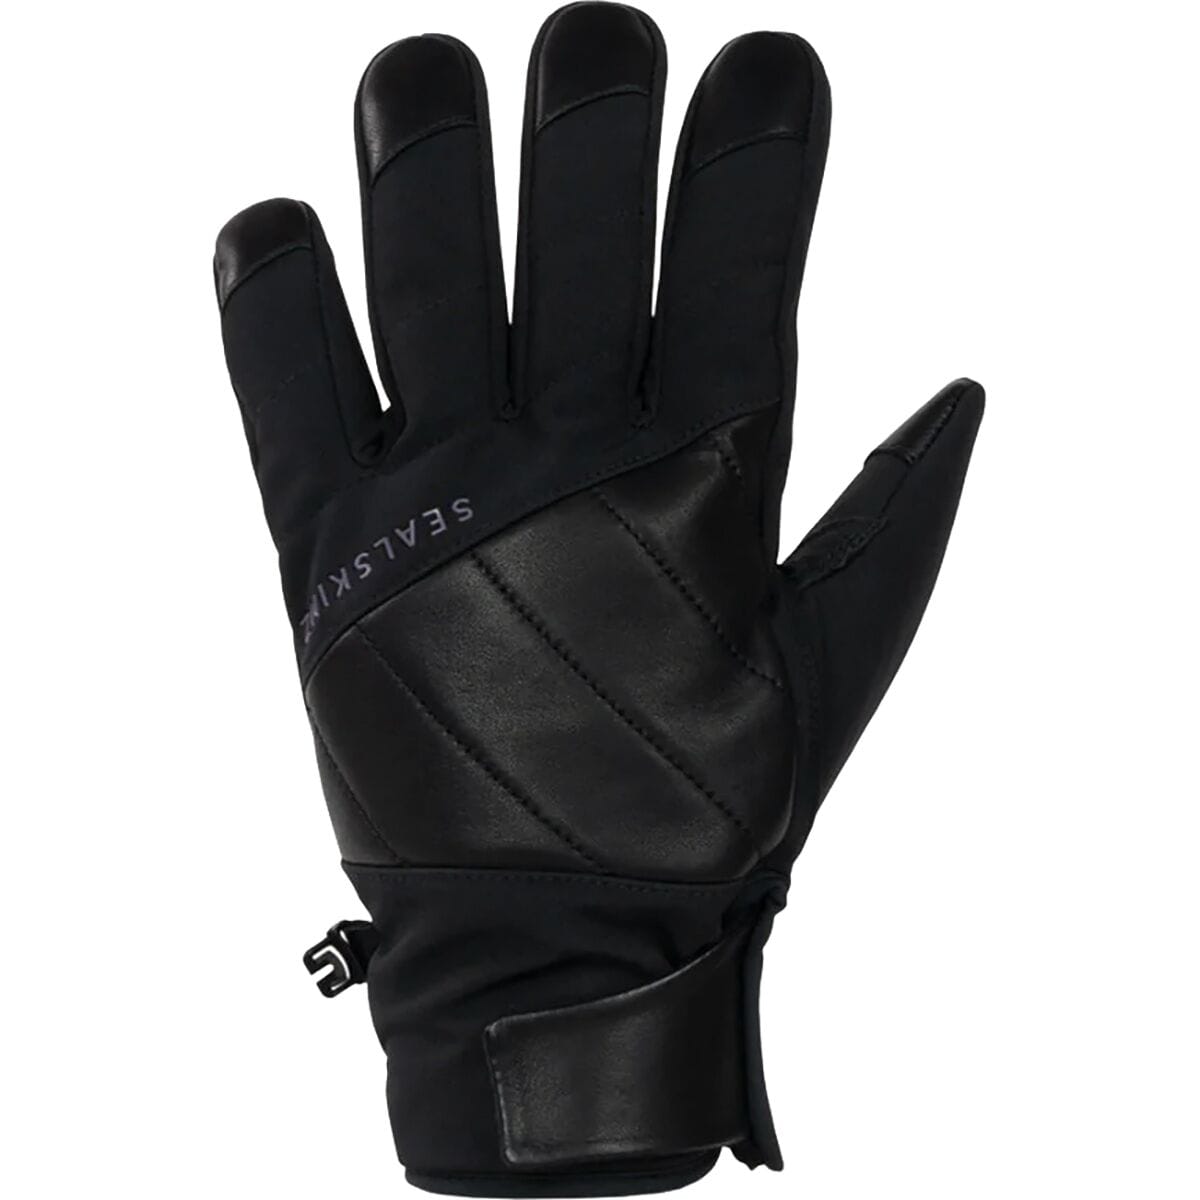 SealSkinz Waterproof Extreme Weather Insulated Glove + Fusion Control